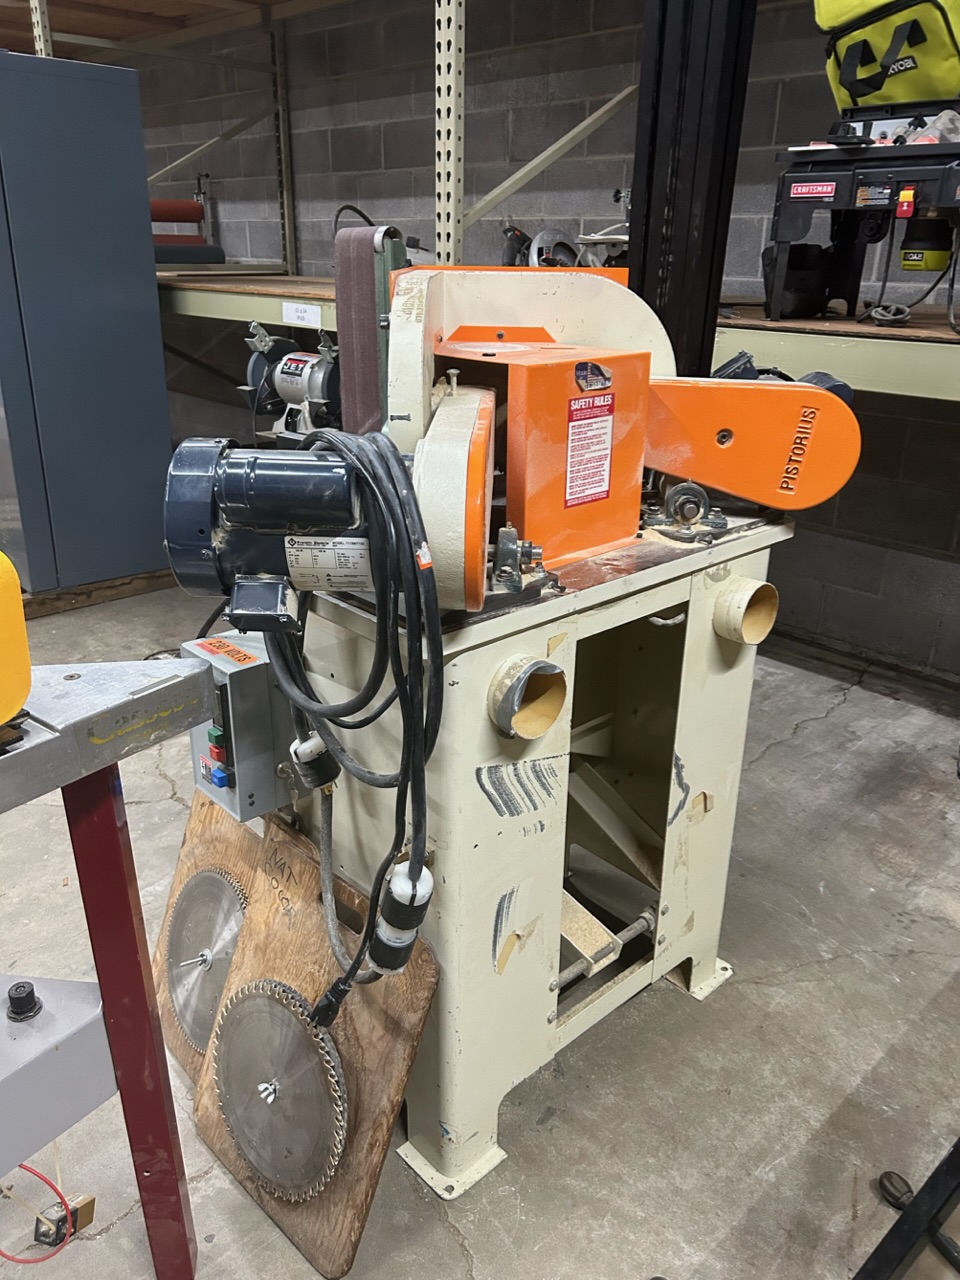 Equipment Lot: Wizard 8000 CMC – Computerized Mat Cutter & Pistorius EMN-12 Double Miter Saw (Used) Item # UE-091923B